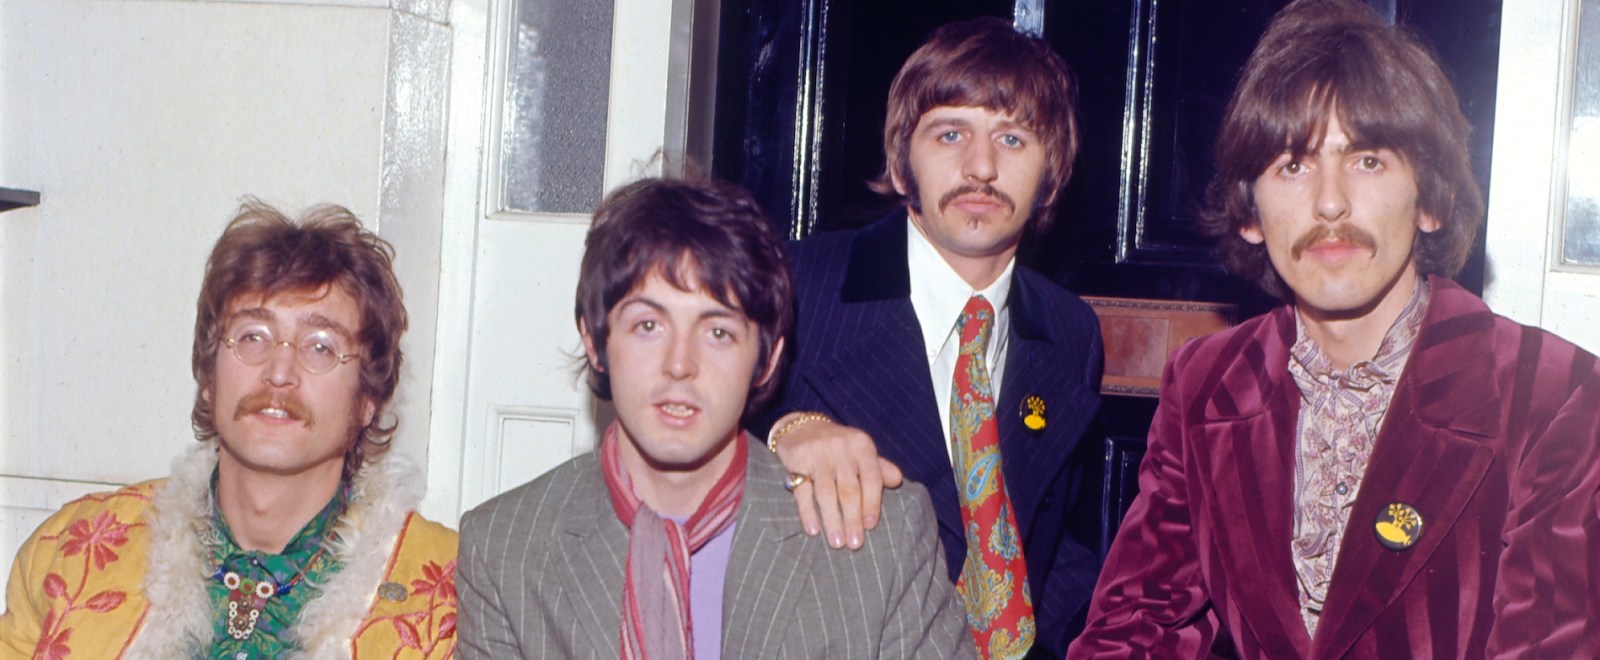 The Beatles Cinematic Universe Is Coming With Four Movies, One For Each Band Member, On The Way